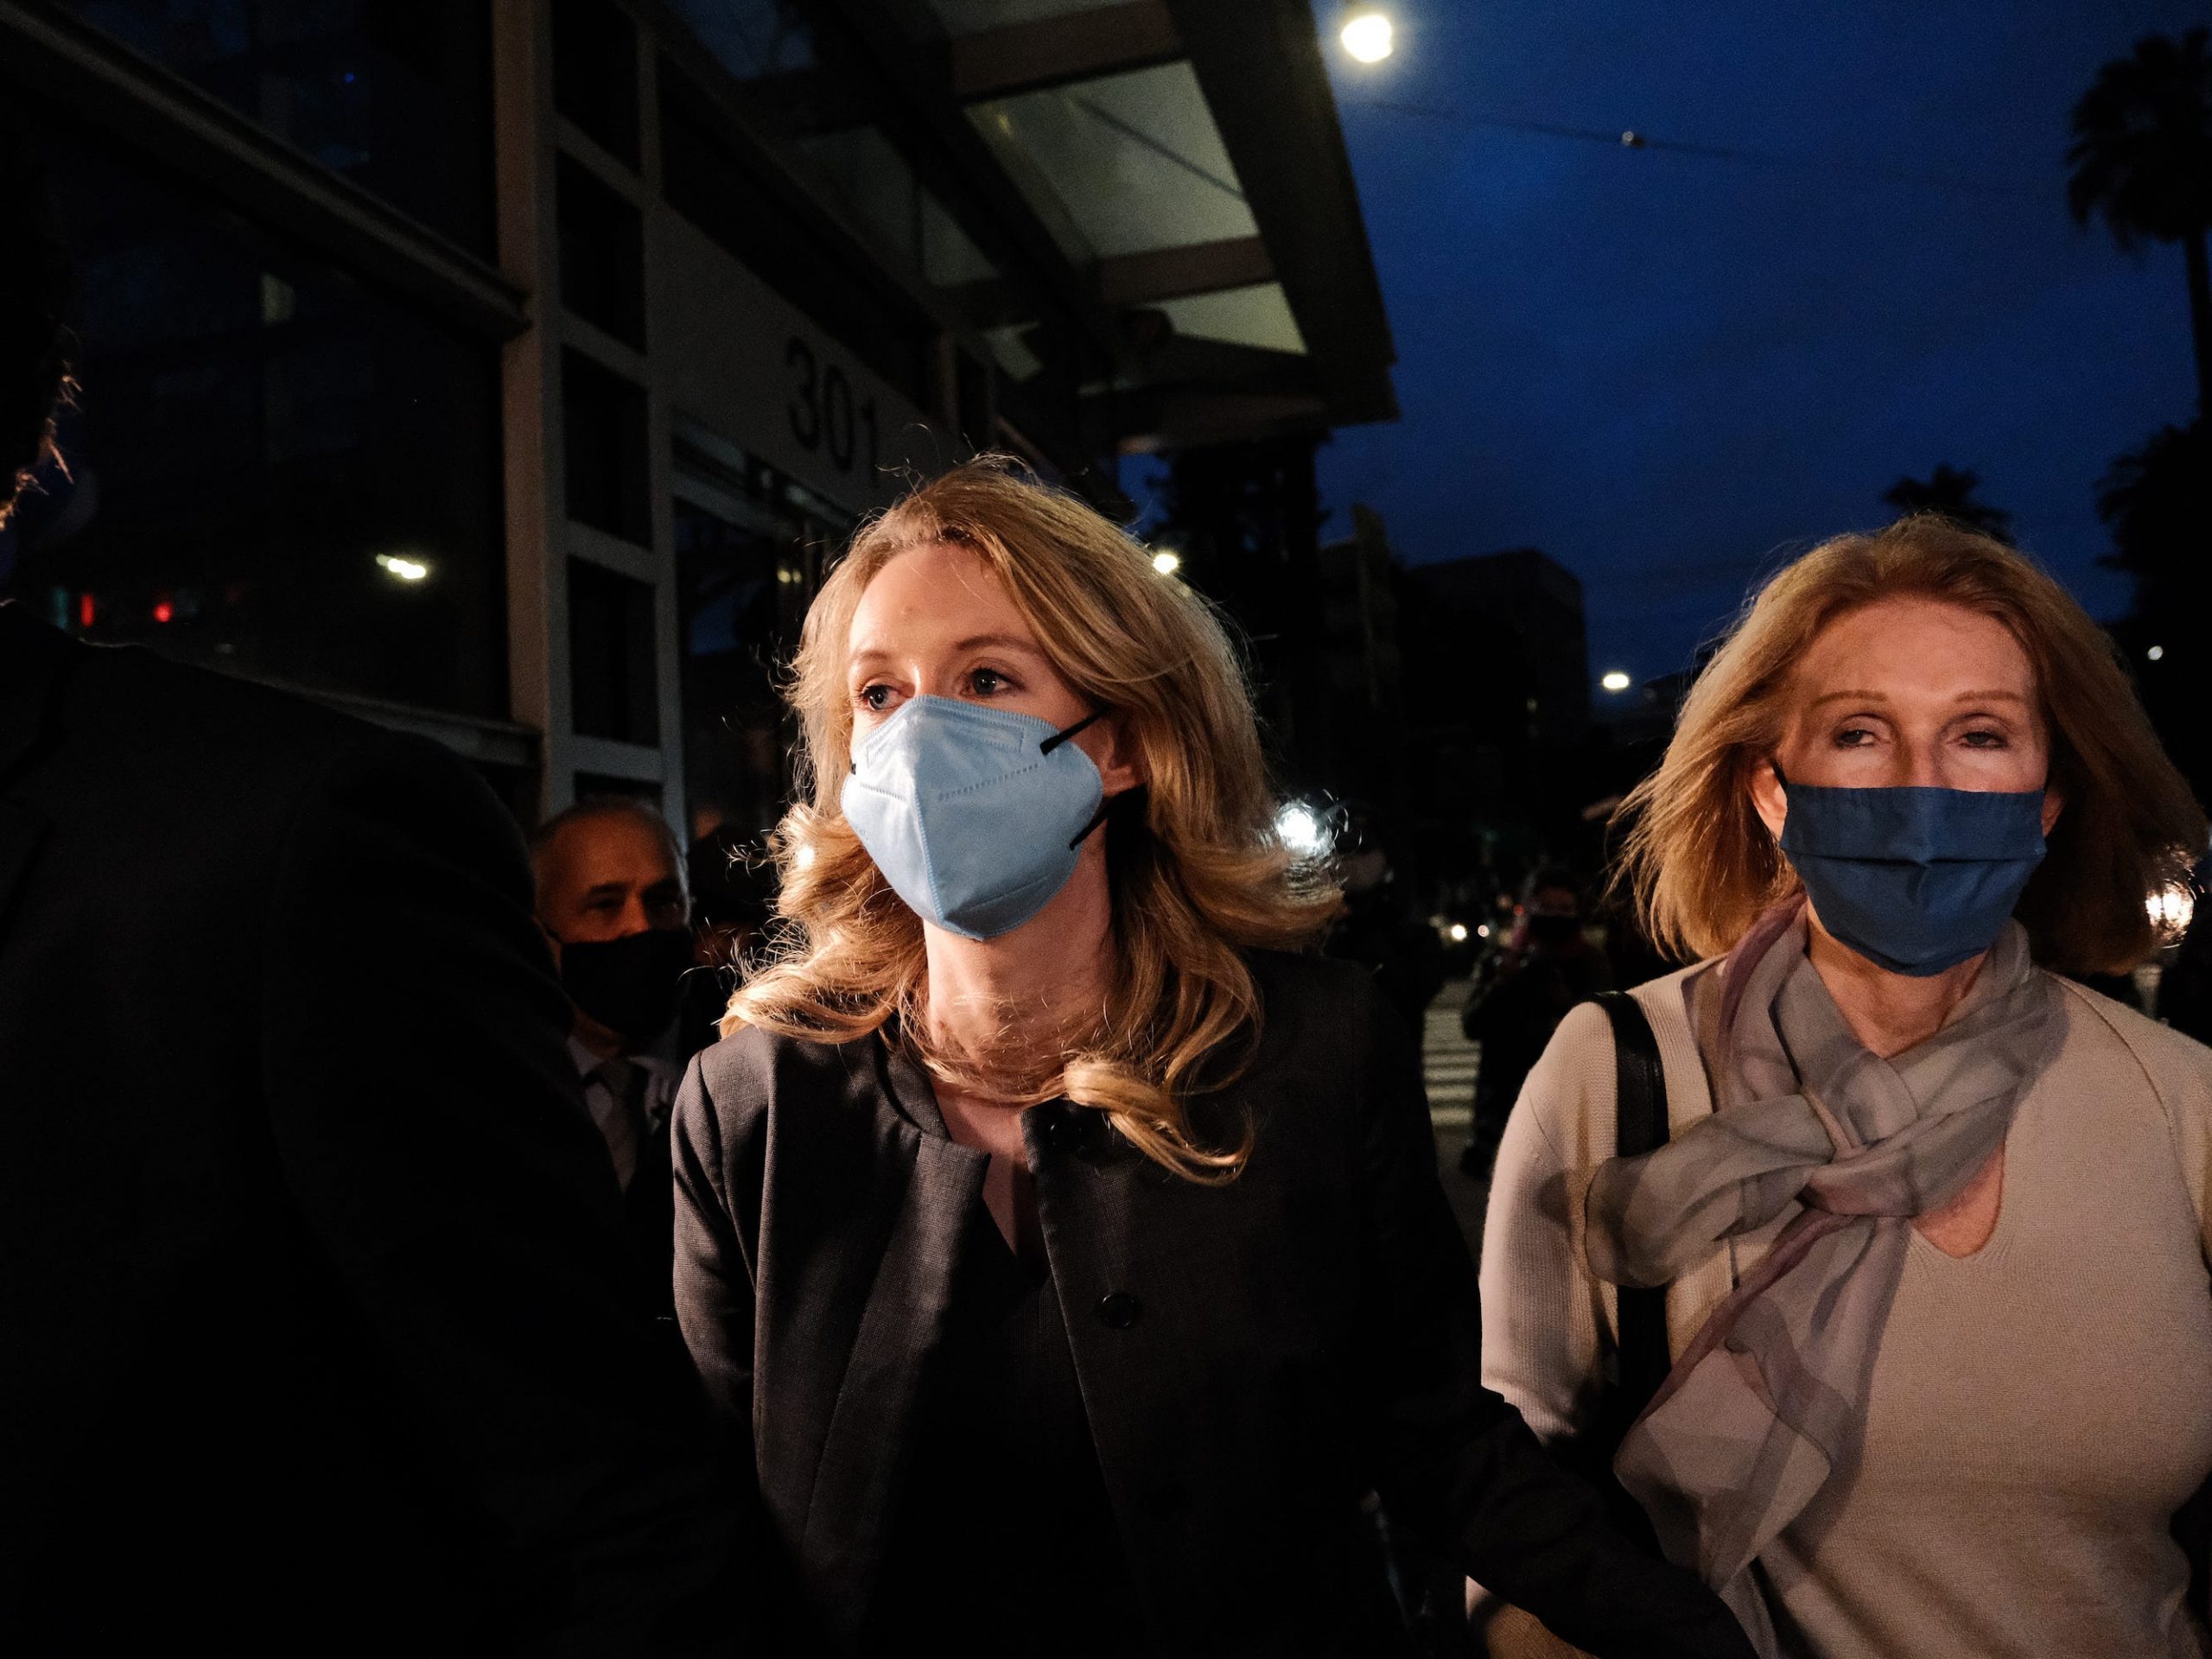 Theranos founder and former CEO Elizabeth Holmes (C) and her mother Noel Holmes leave the Robert F. Peckham Federal Building on January 3, 2022 in San Jose, California.